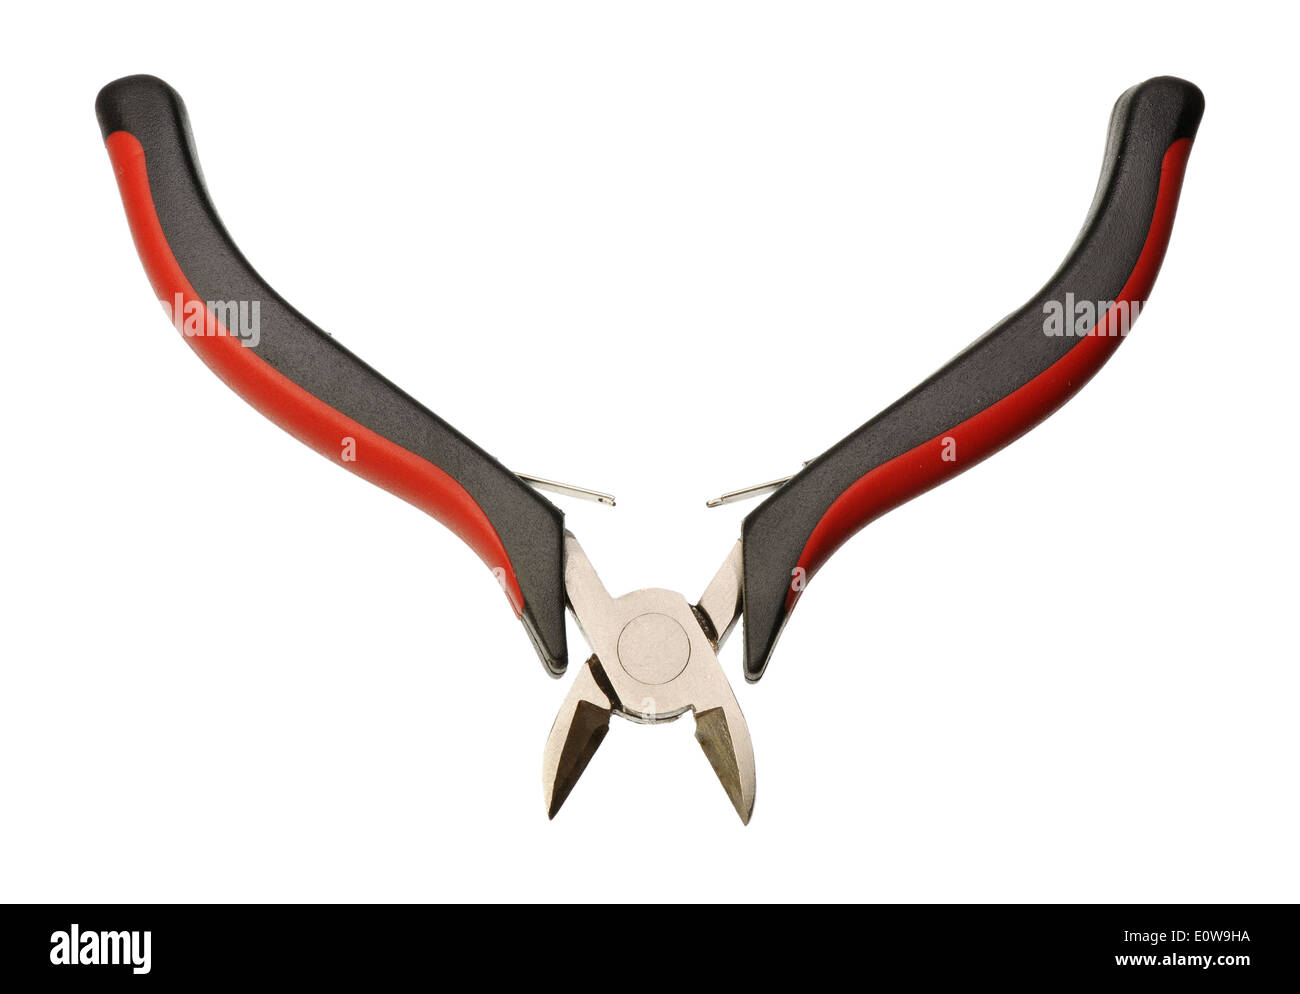 Side Cutters with red and black handgrip on a white background, isolated Stock Photo